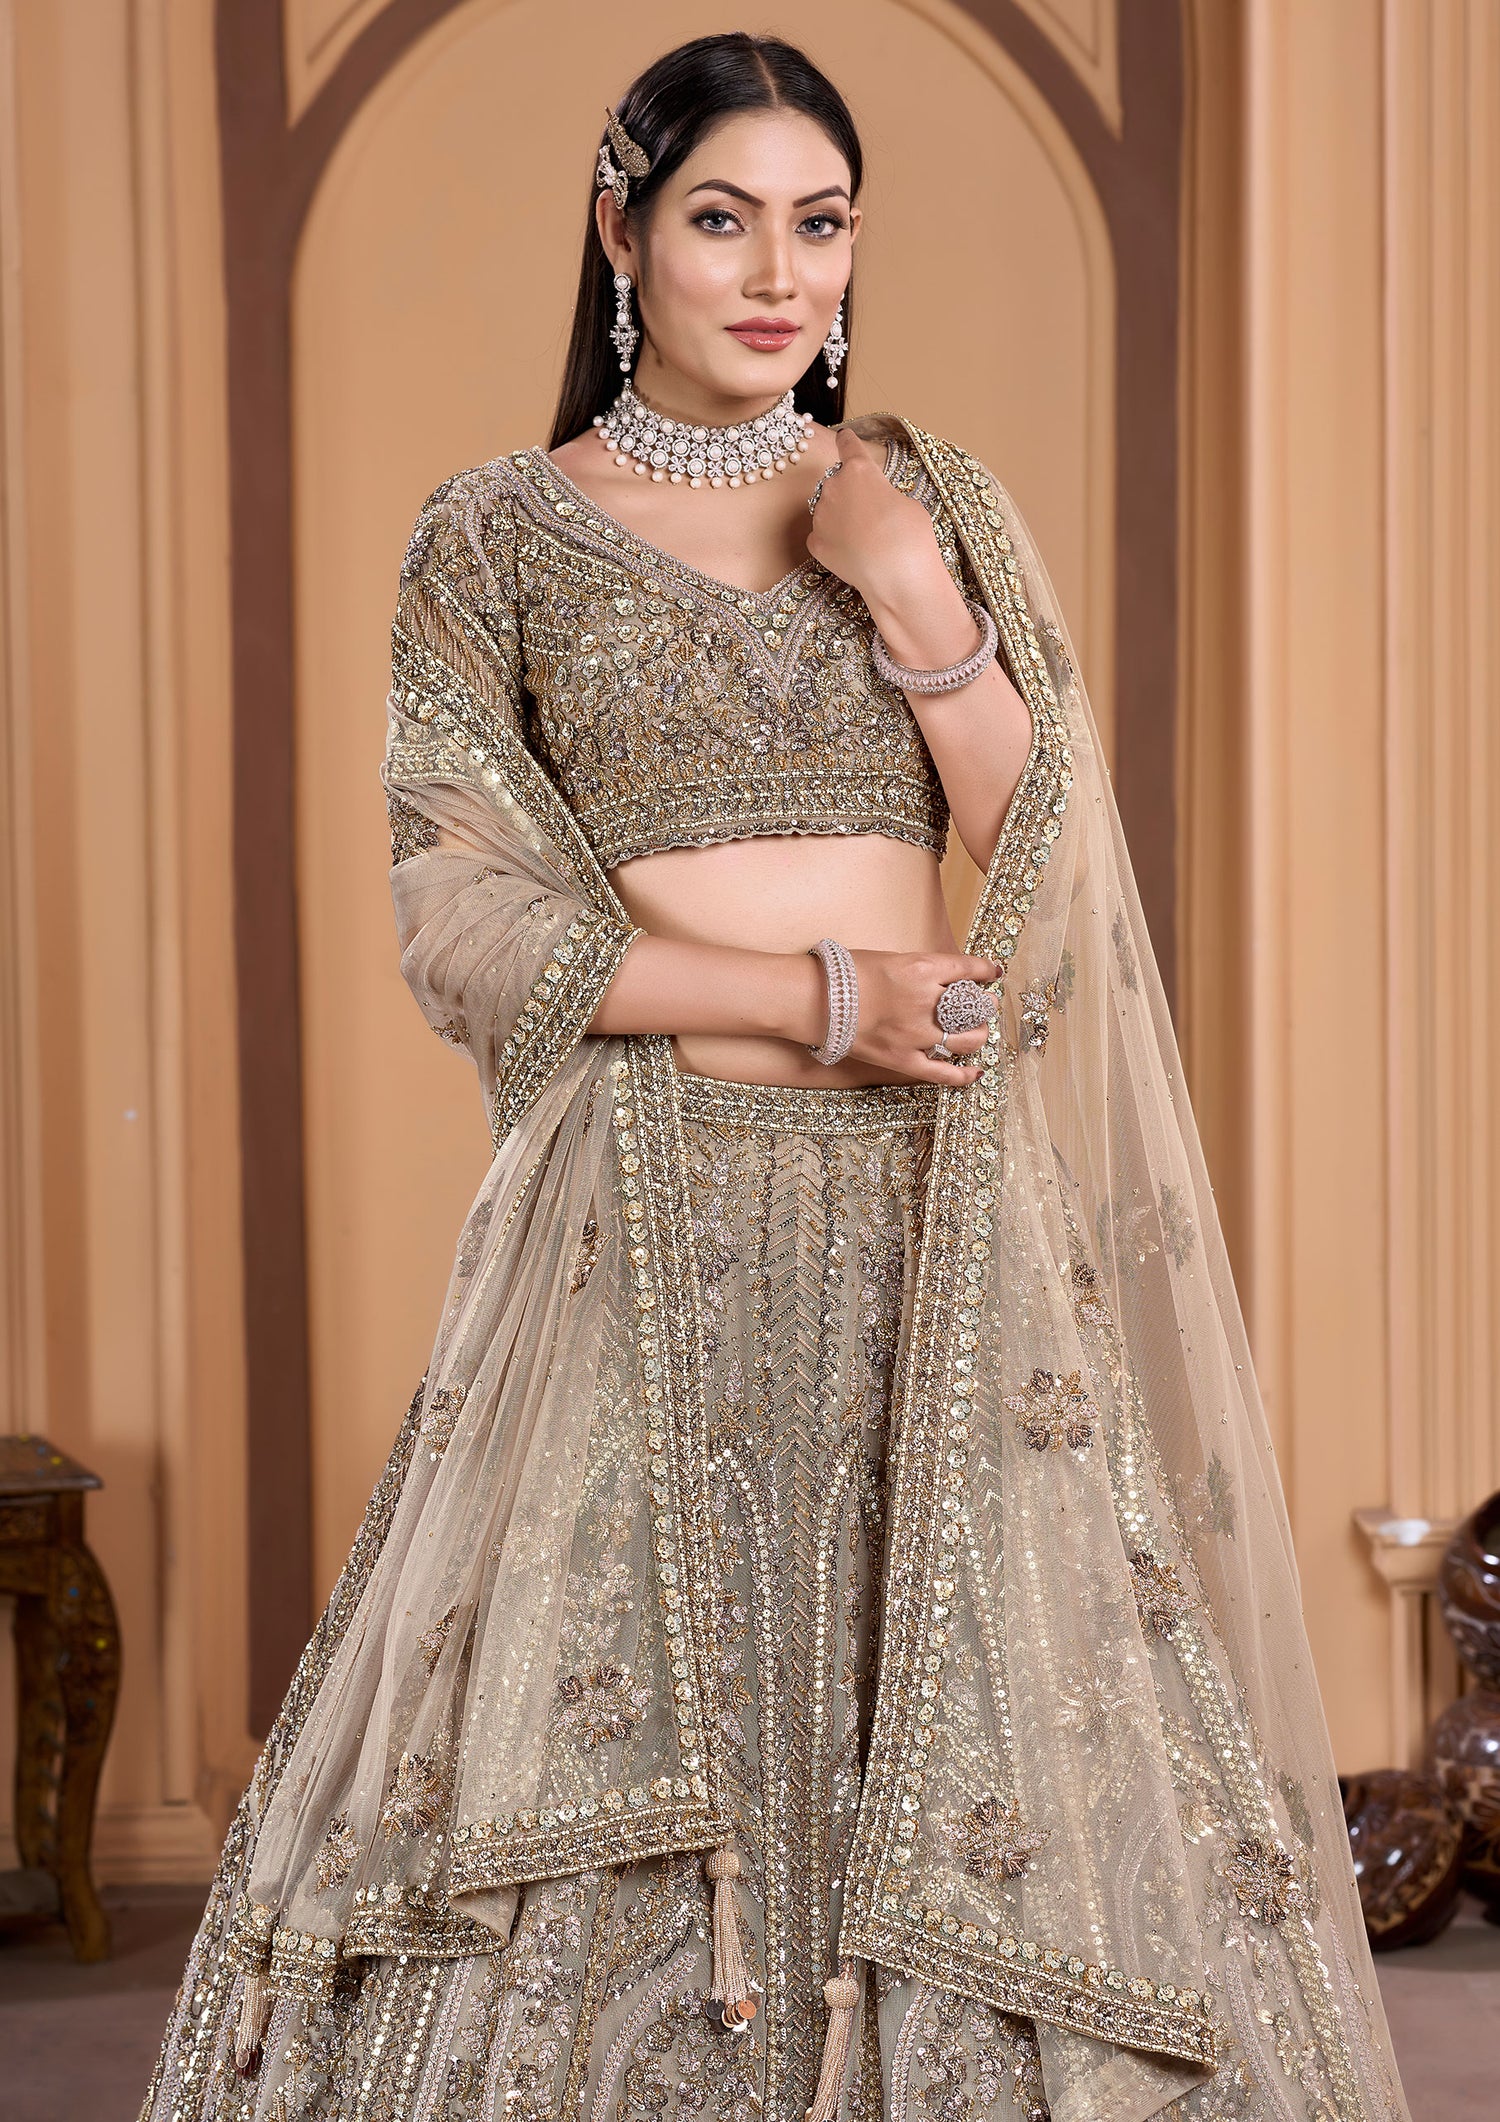 A stunning beige lehenga adorned with intricate embroidery and delicate net work.